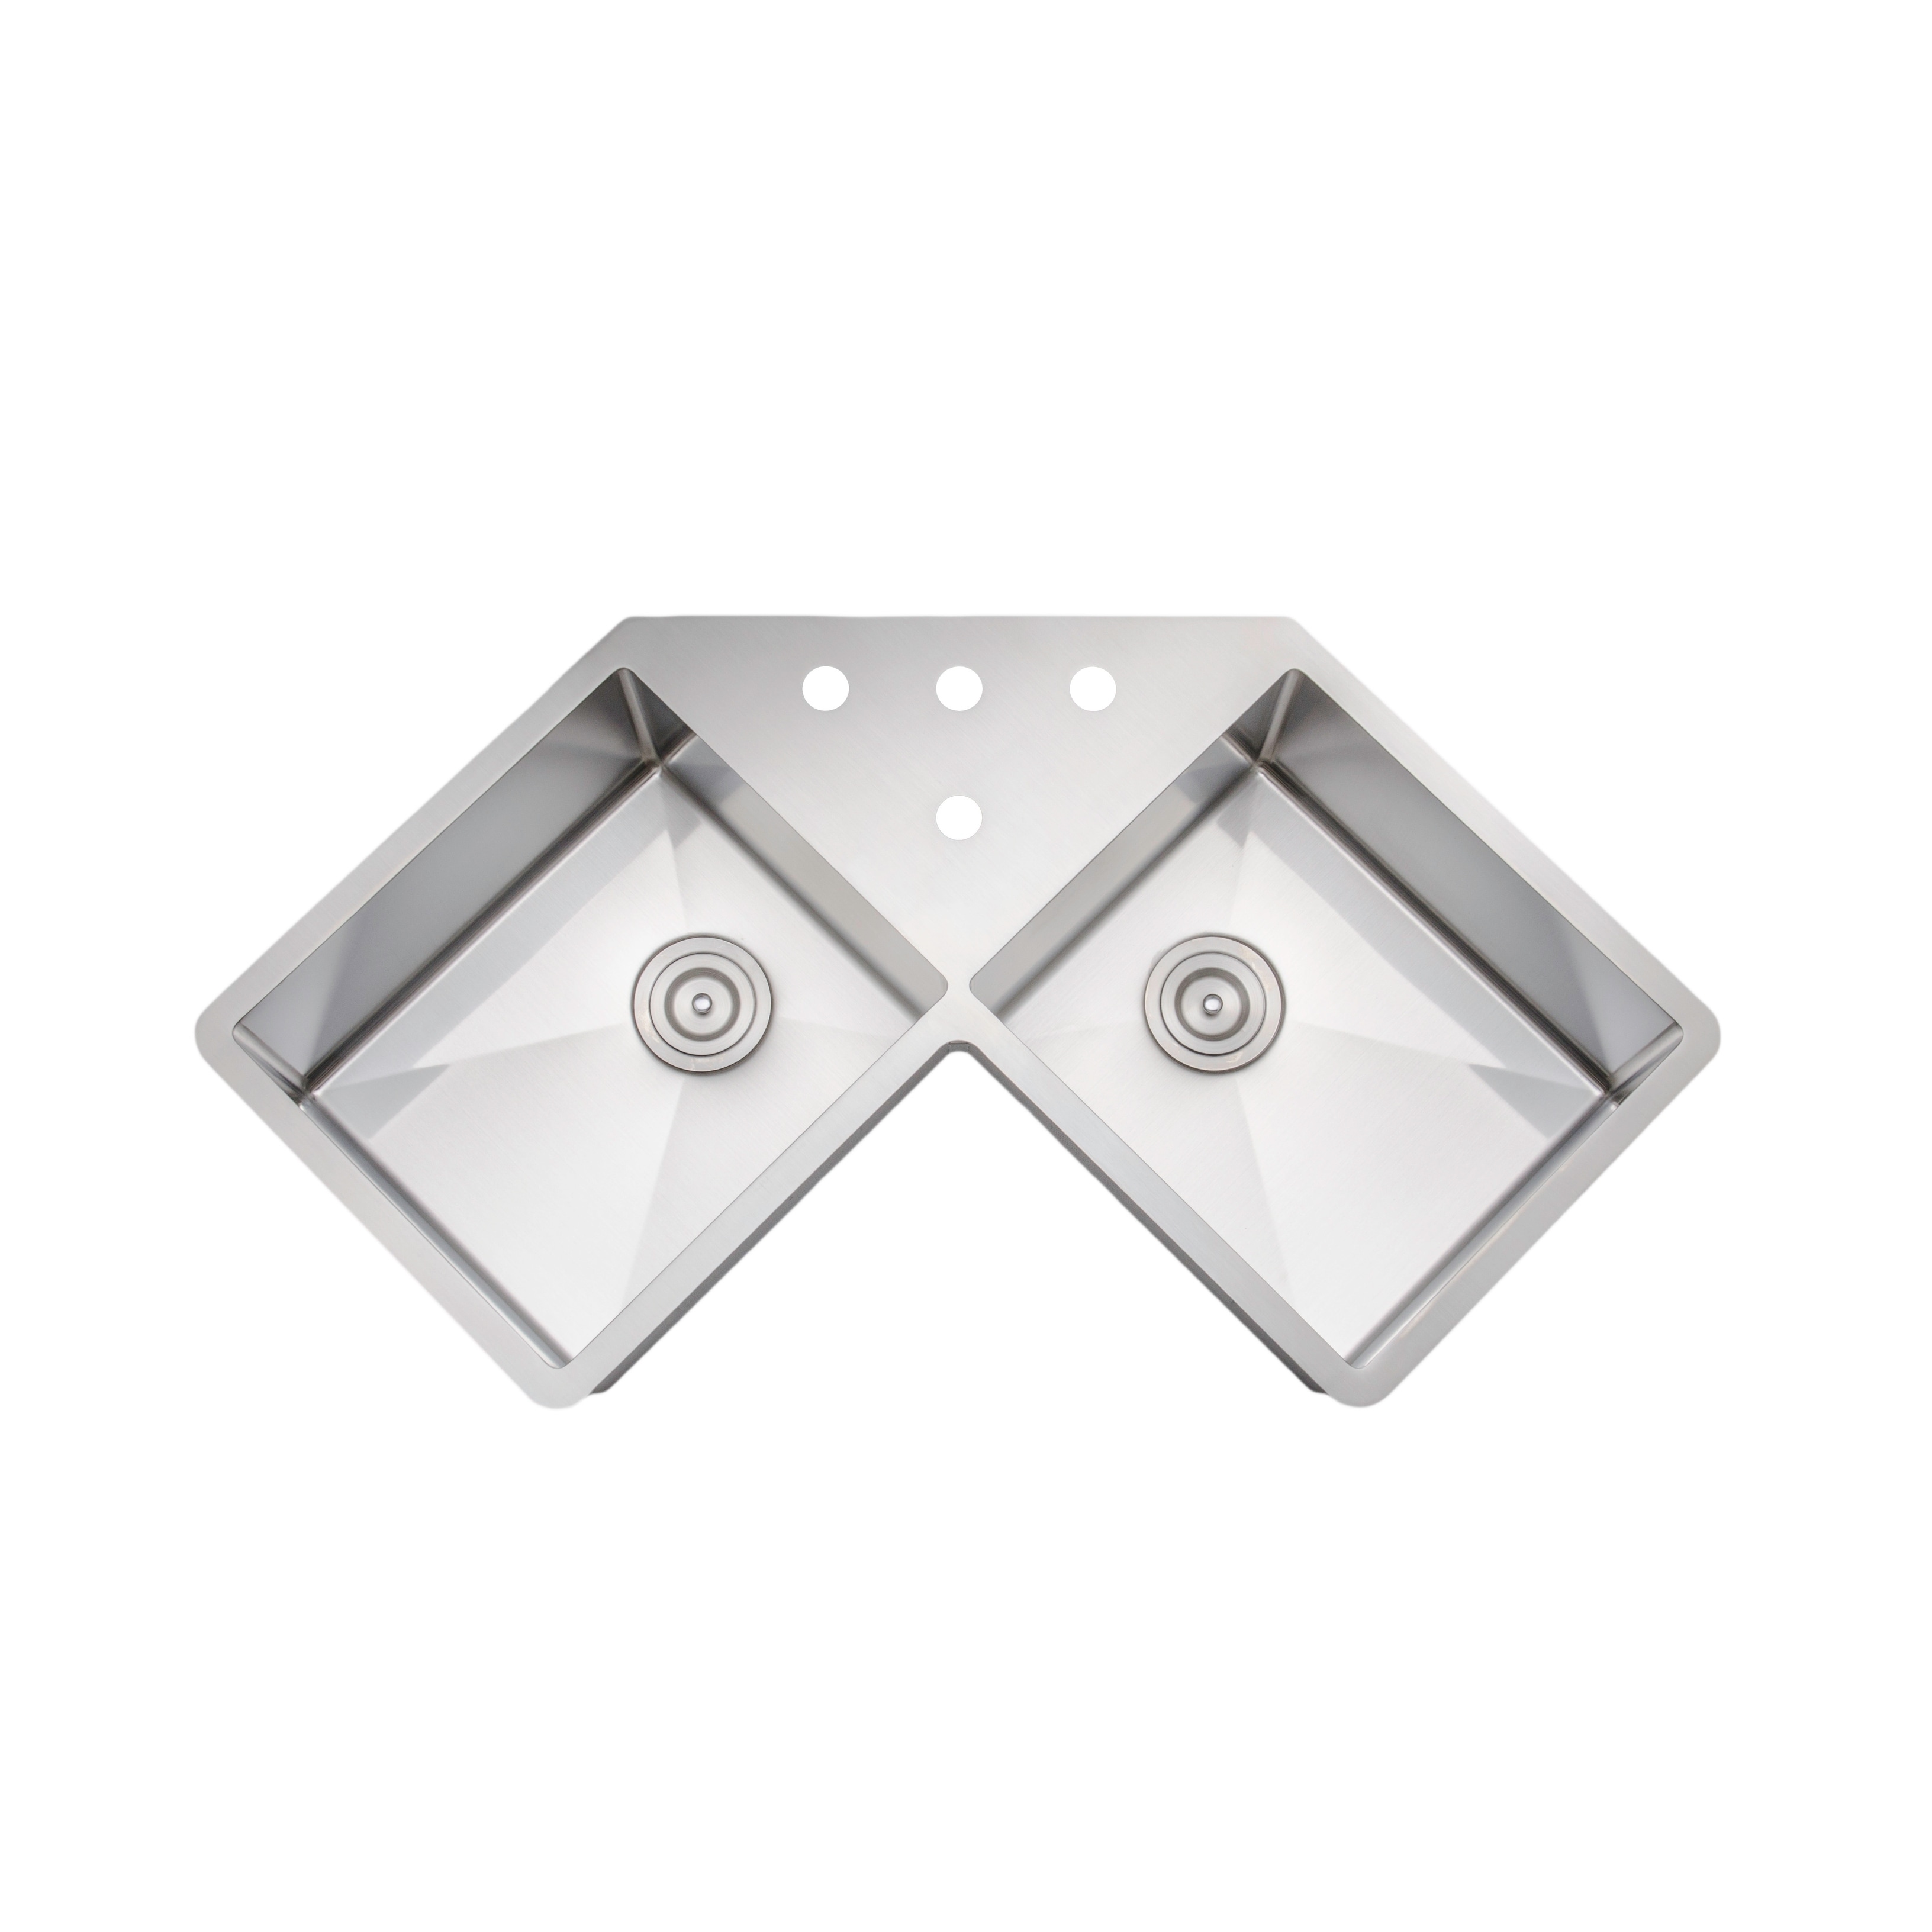 Wells Sinkware Handcrafted 46 Inch 16 Gauge Undermount Butterfly Equal Double Bowl Stainless Steel Corner Kitchen Sink